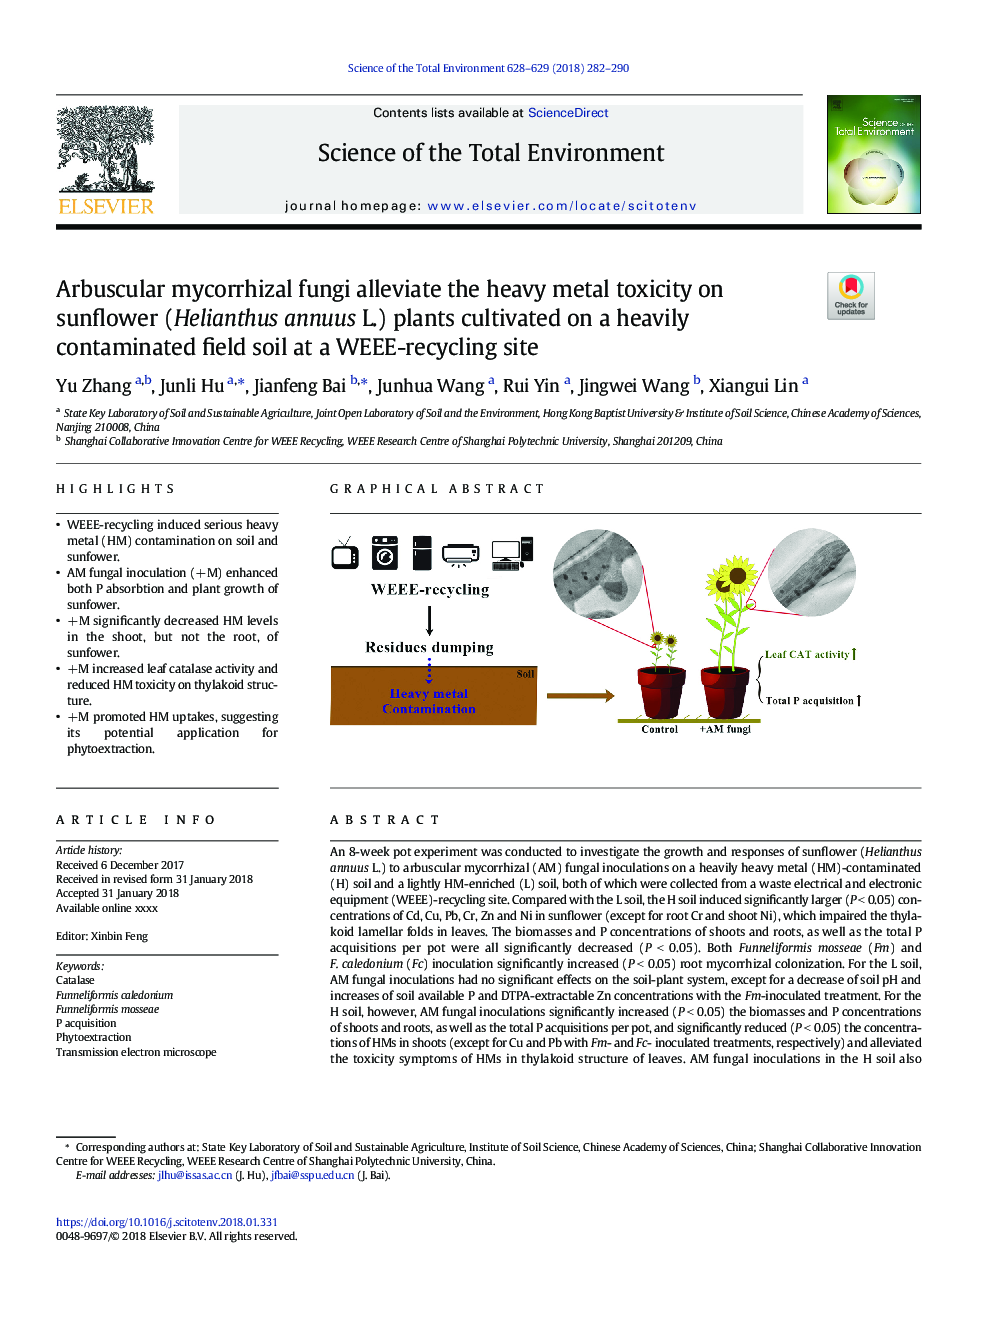 Arbuscular mycorrhizal fungi alleviate the heavy metal toxicity on sunflower (Helianthus annuus L.) plants cultivated on a heavily contaminated field soil at a WEEE-recycling site